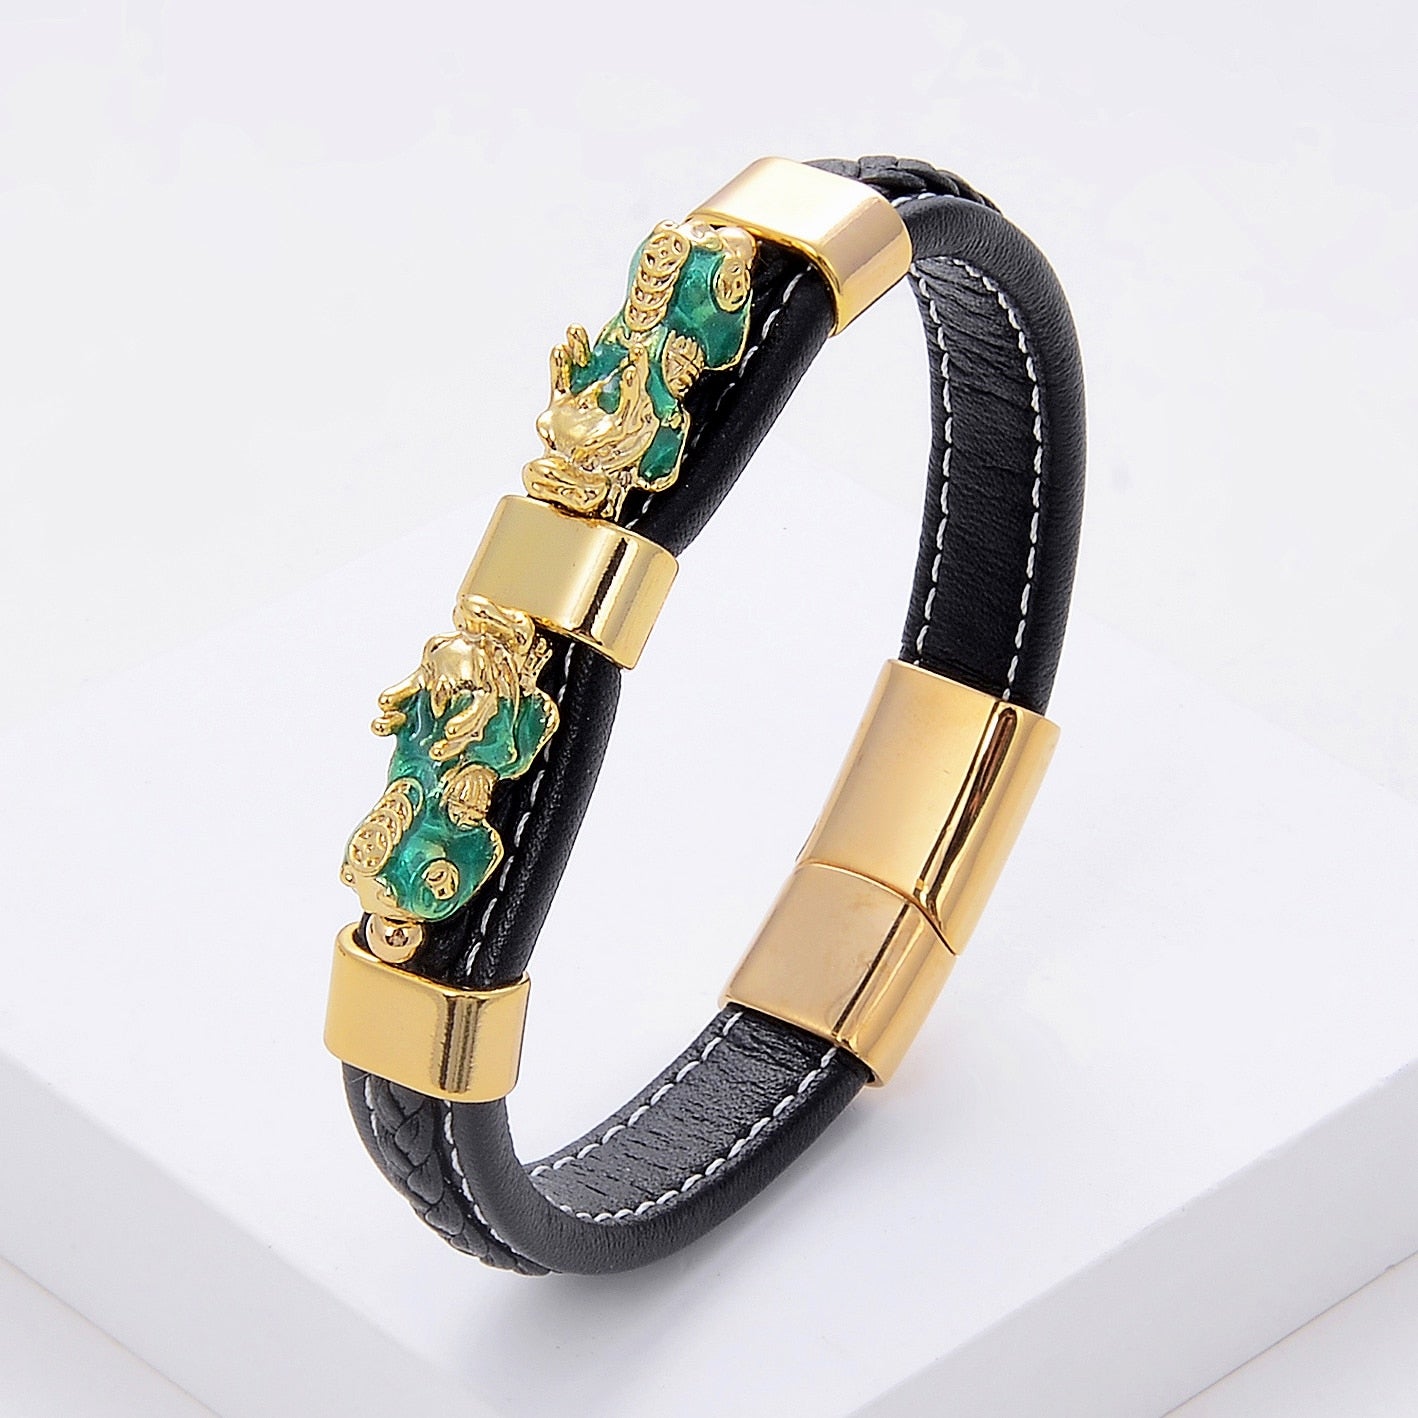 Men's Feng Shui Bracelet Charm Woven Leather Rope Chain Colorful PIXIU Guard Bracelet For Health Wealth And Luck Jewelry - Bonnie Lassio